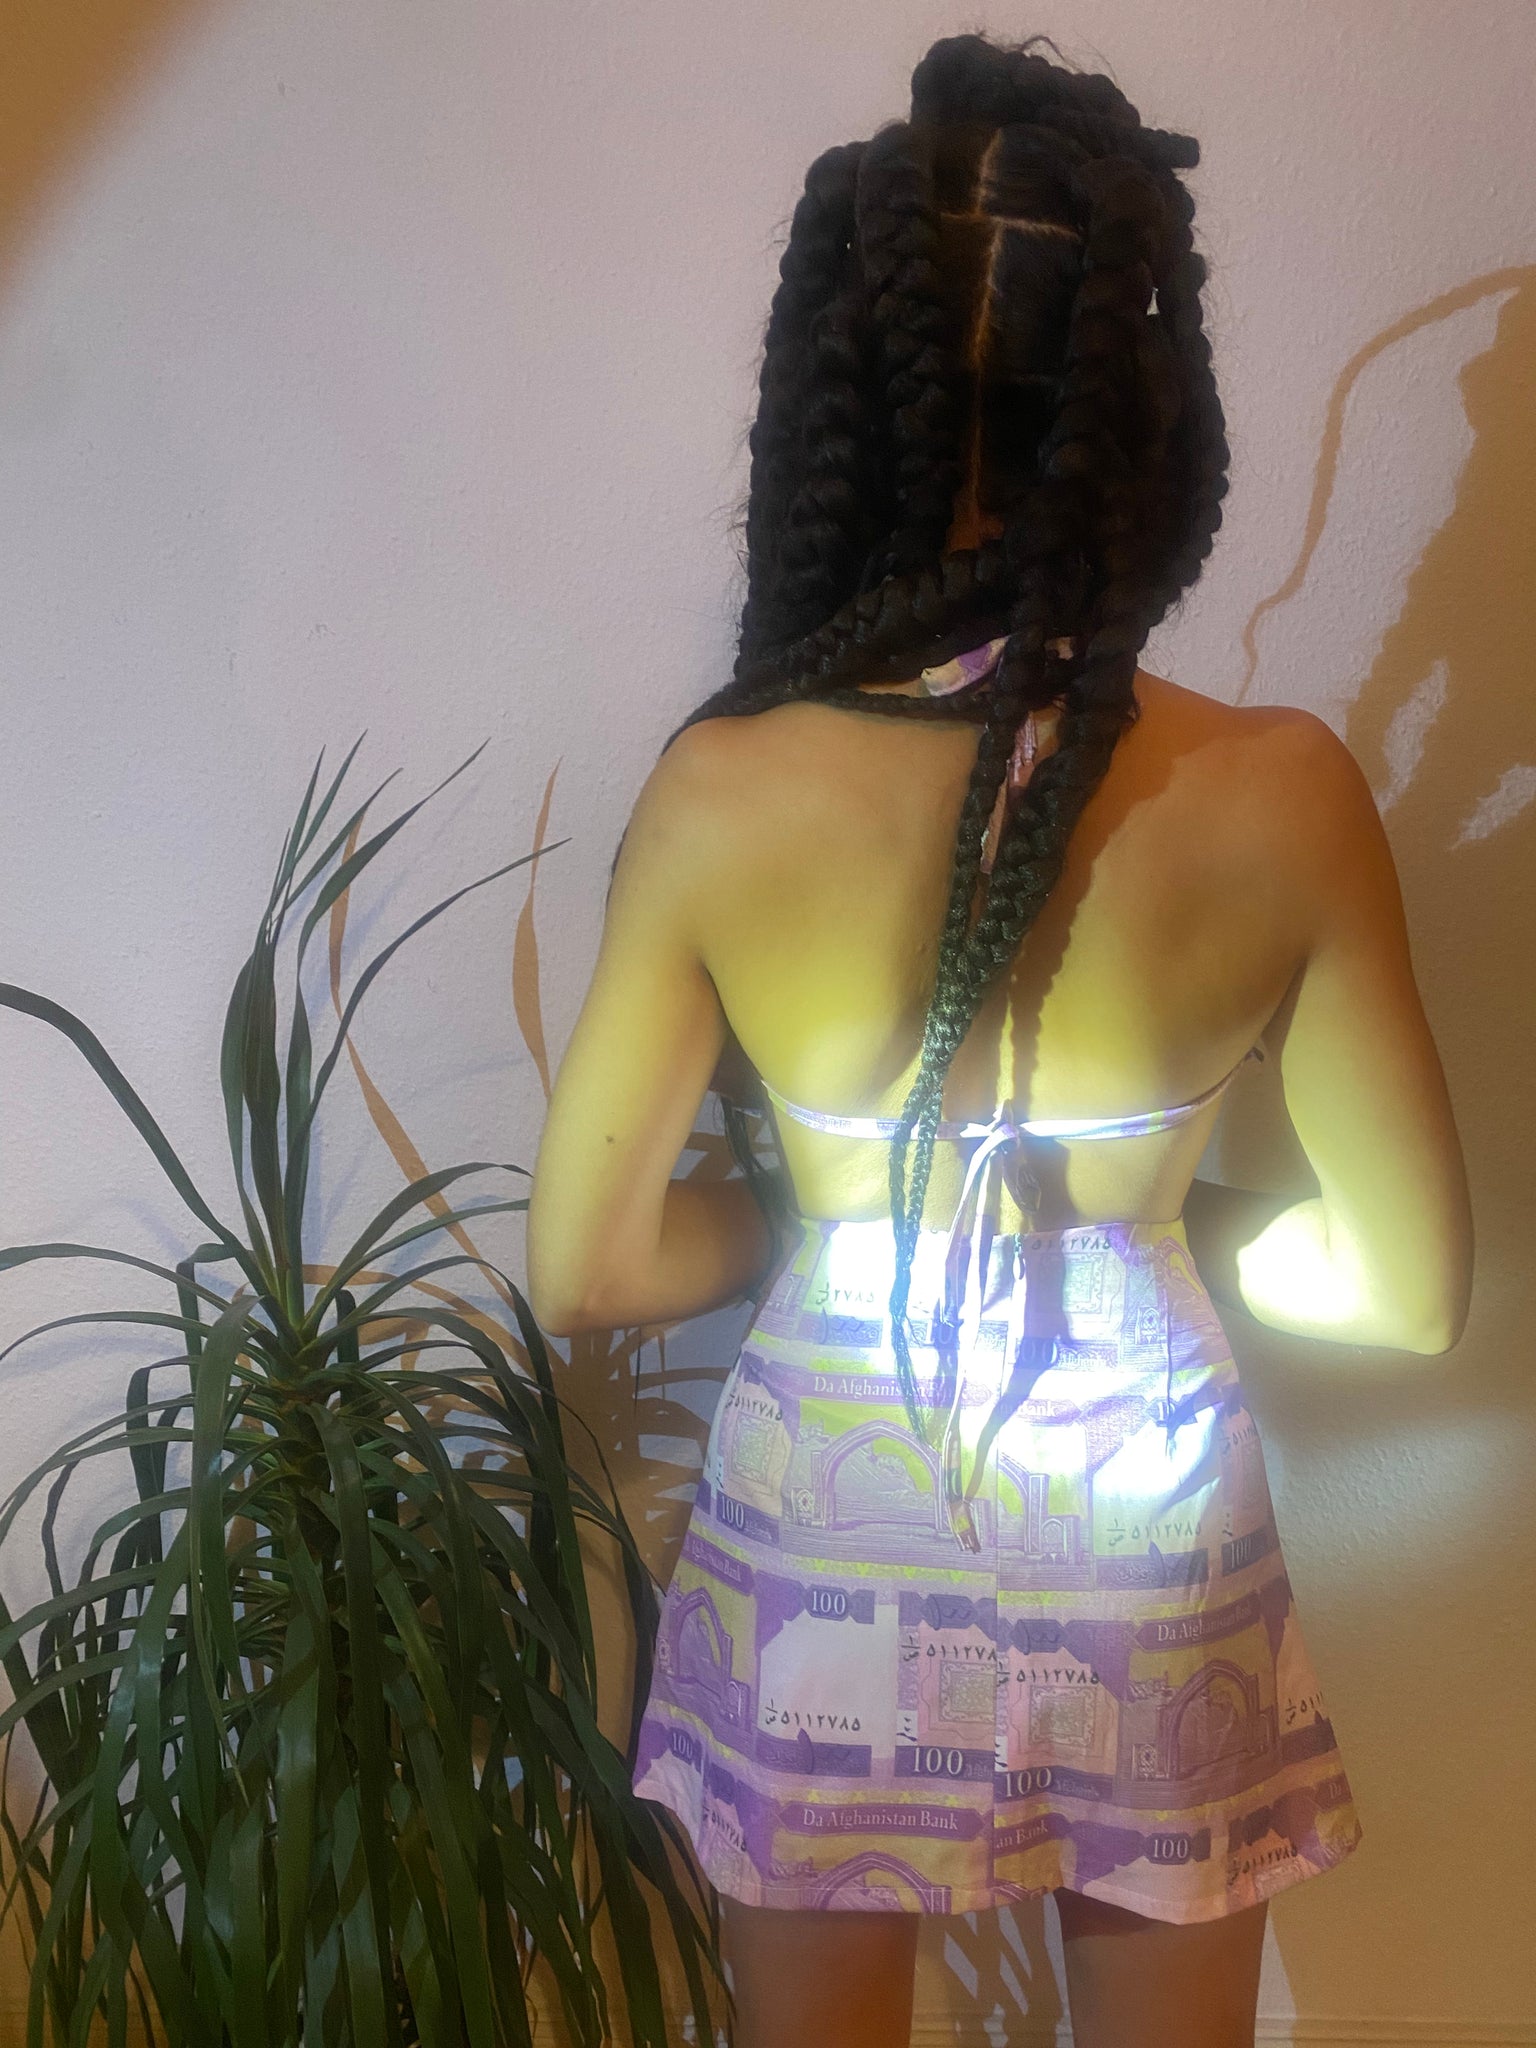 A woman's back showing the tie closure of her halter top.